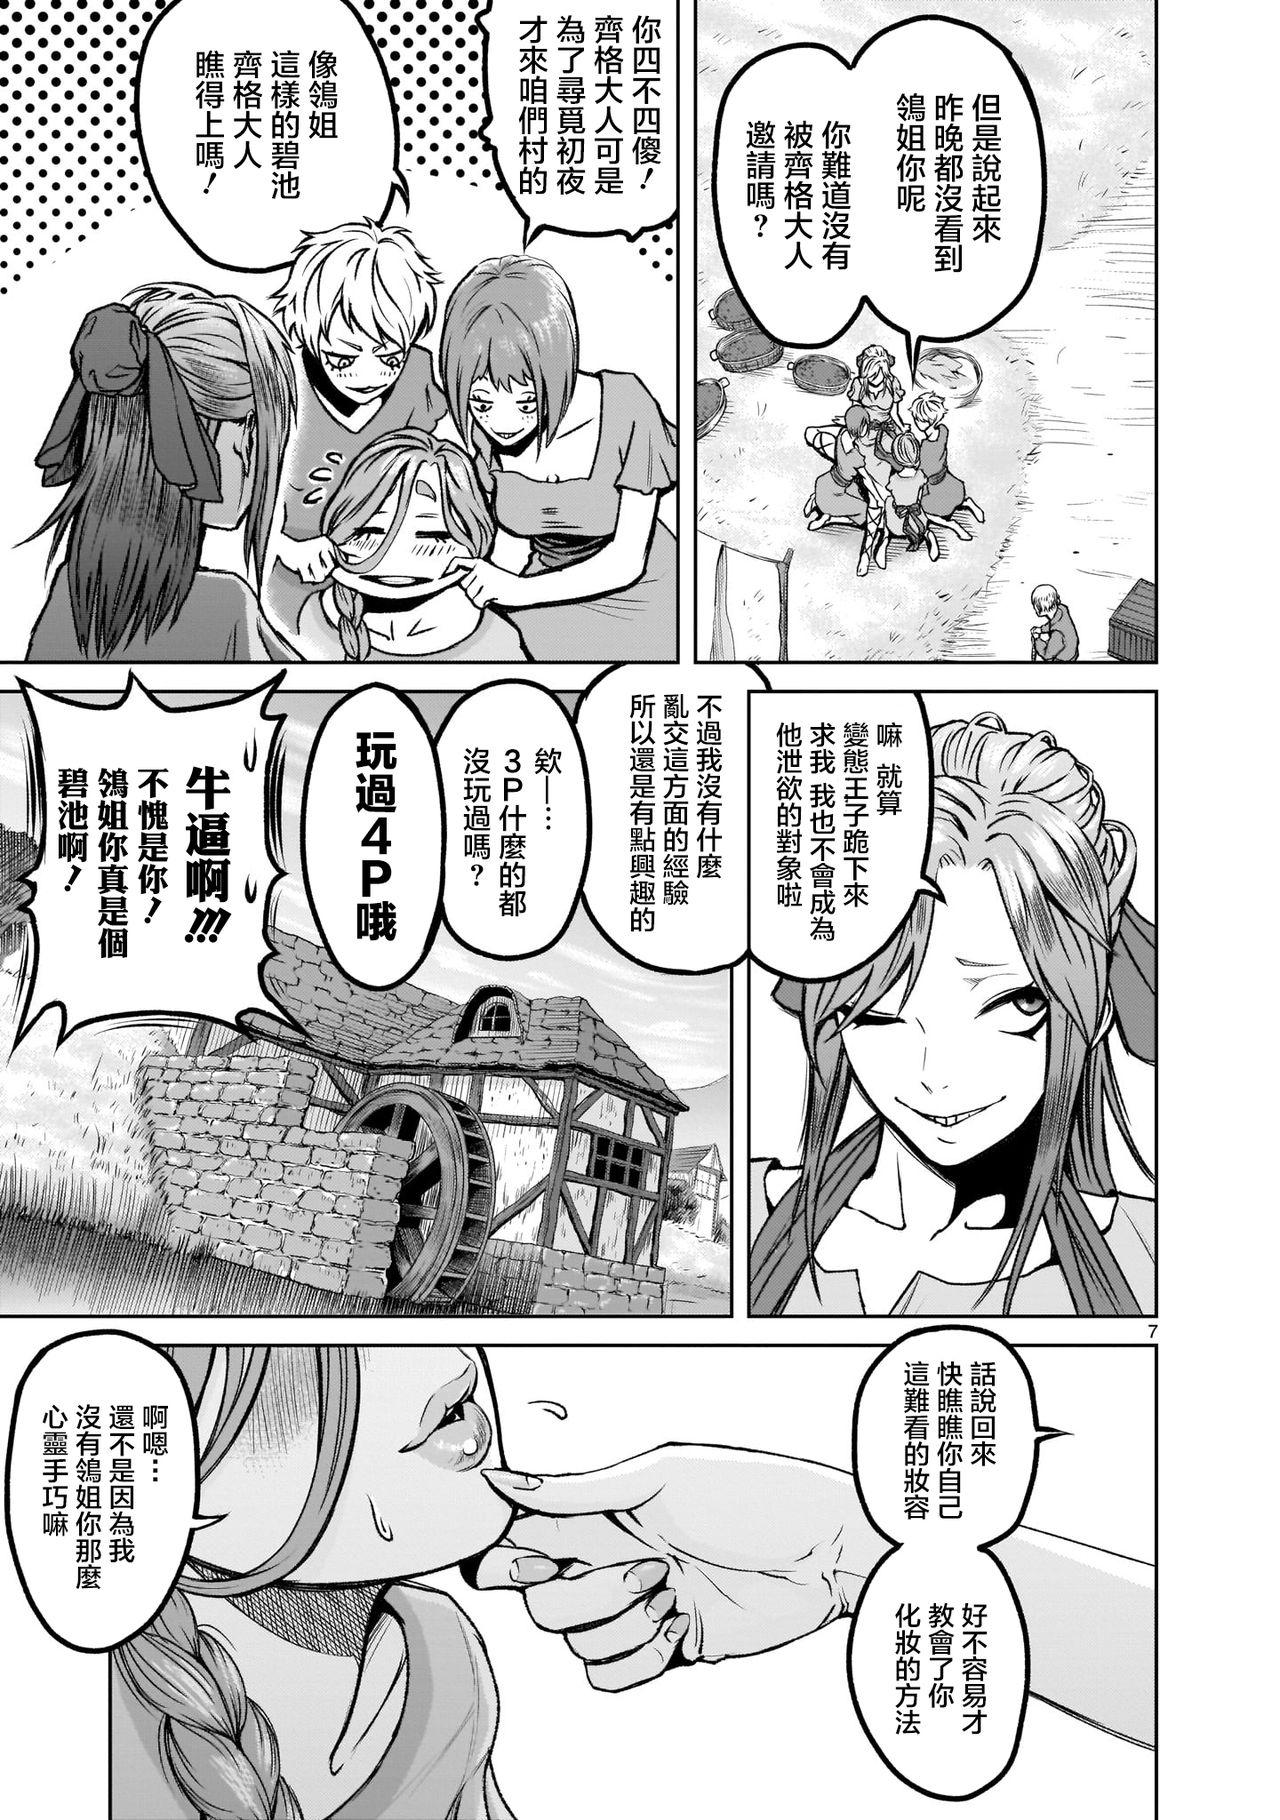 Shower 蔷薇园传奇 01-03 Chinese Mulher - Page 8